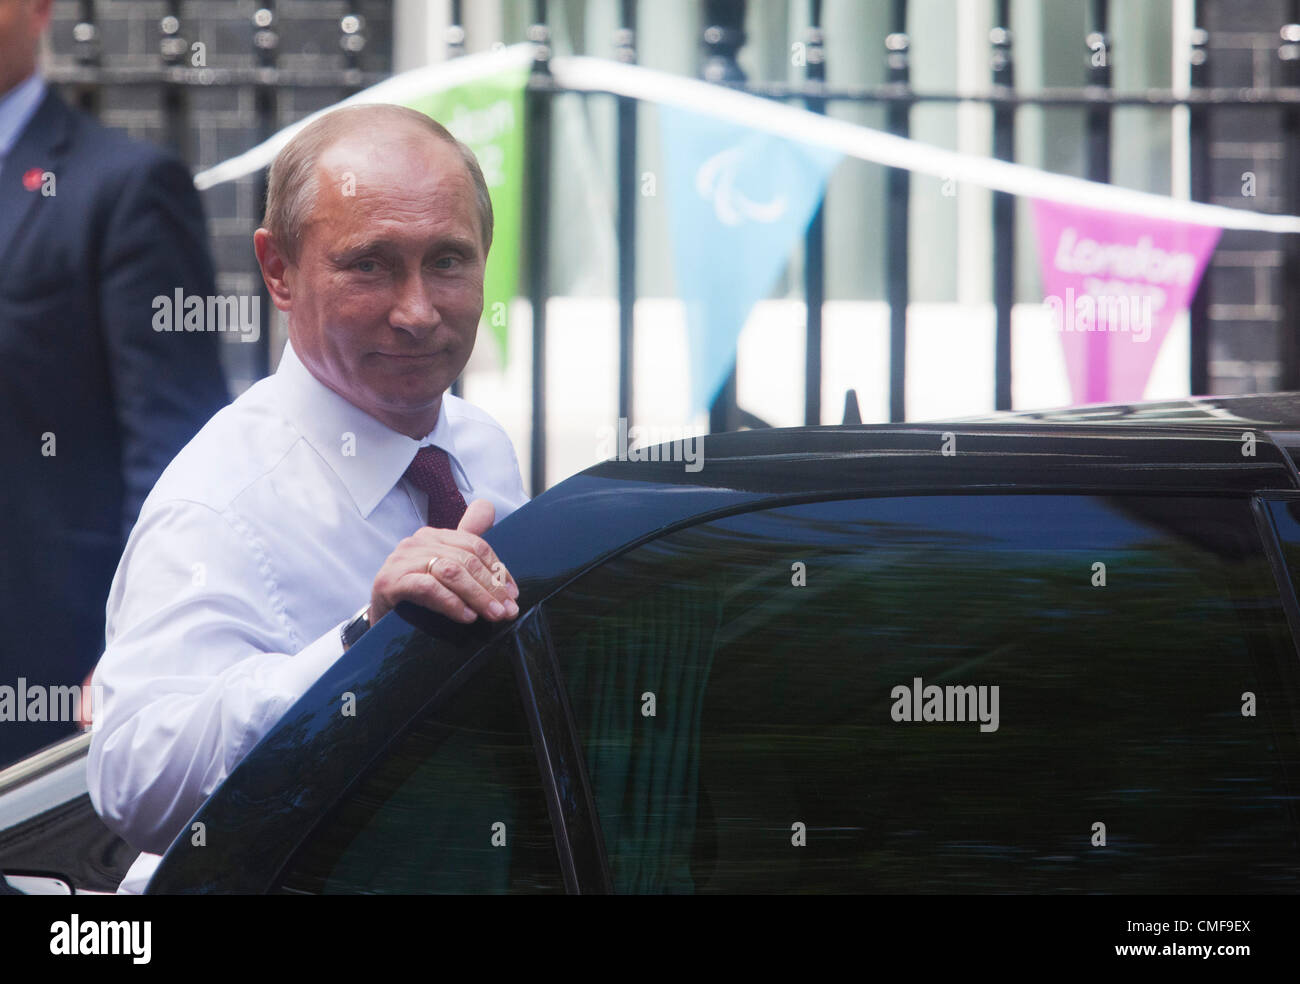 2nd August 2012. London, England, UK. Thursday, 2 August 2012. Vladimir Putin leaves Downing Street. Vladimir Putin, President of Russia, meets with Prime Minister David Cameron for talks at Downing Street, London before visiting the Olympic Games to watch some judo competitions. Credit:  Nick Savage / Alamy Live News. Stock Photo